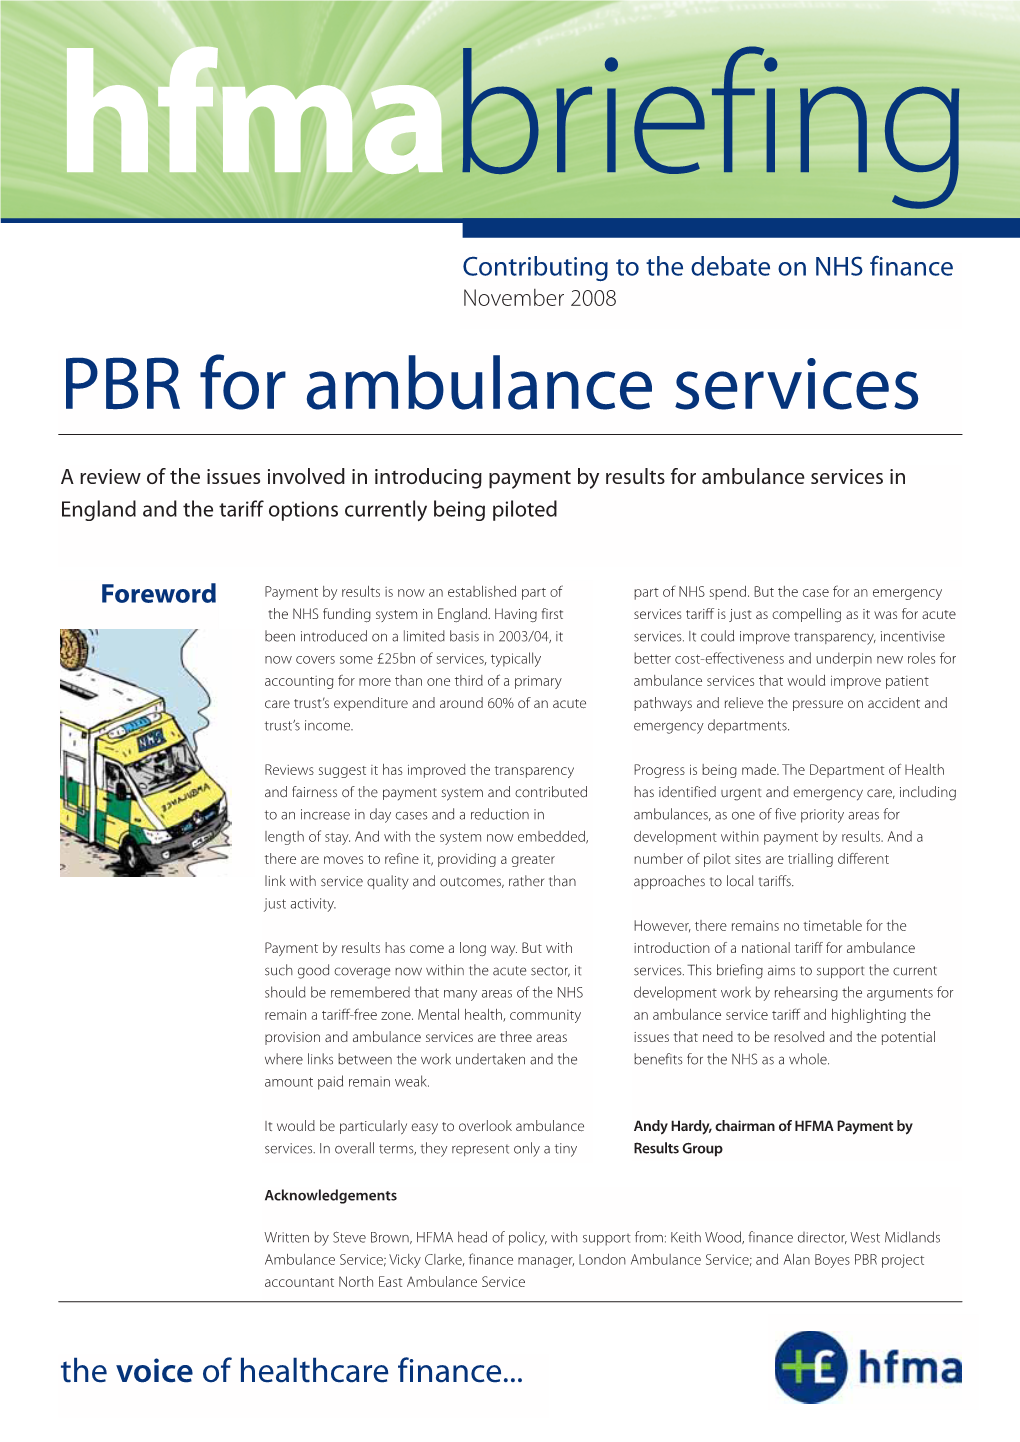 PBR for Ambulance Services